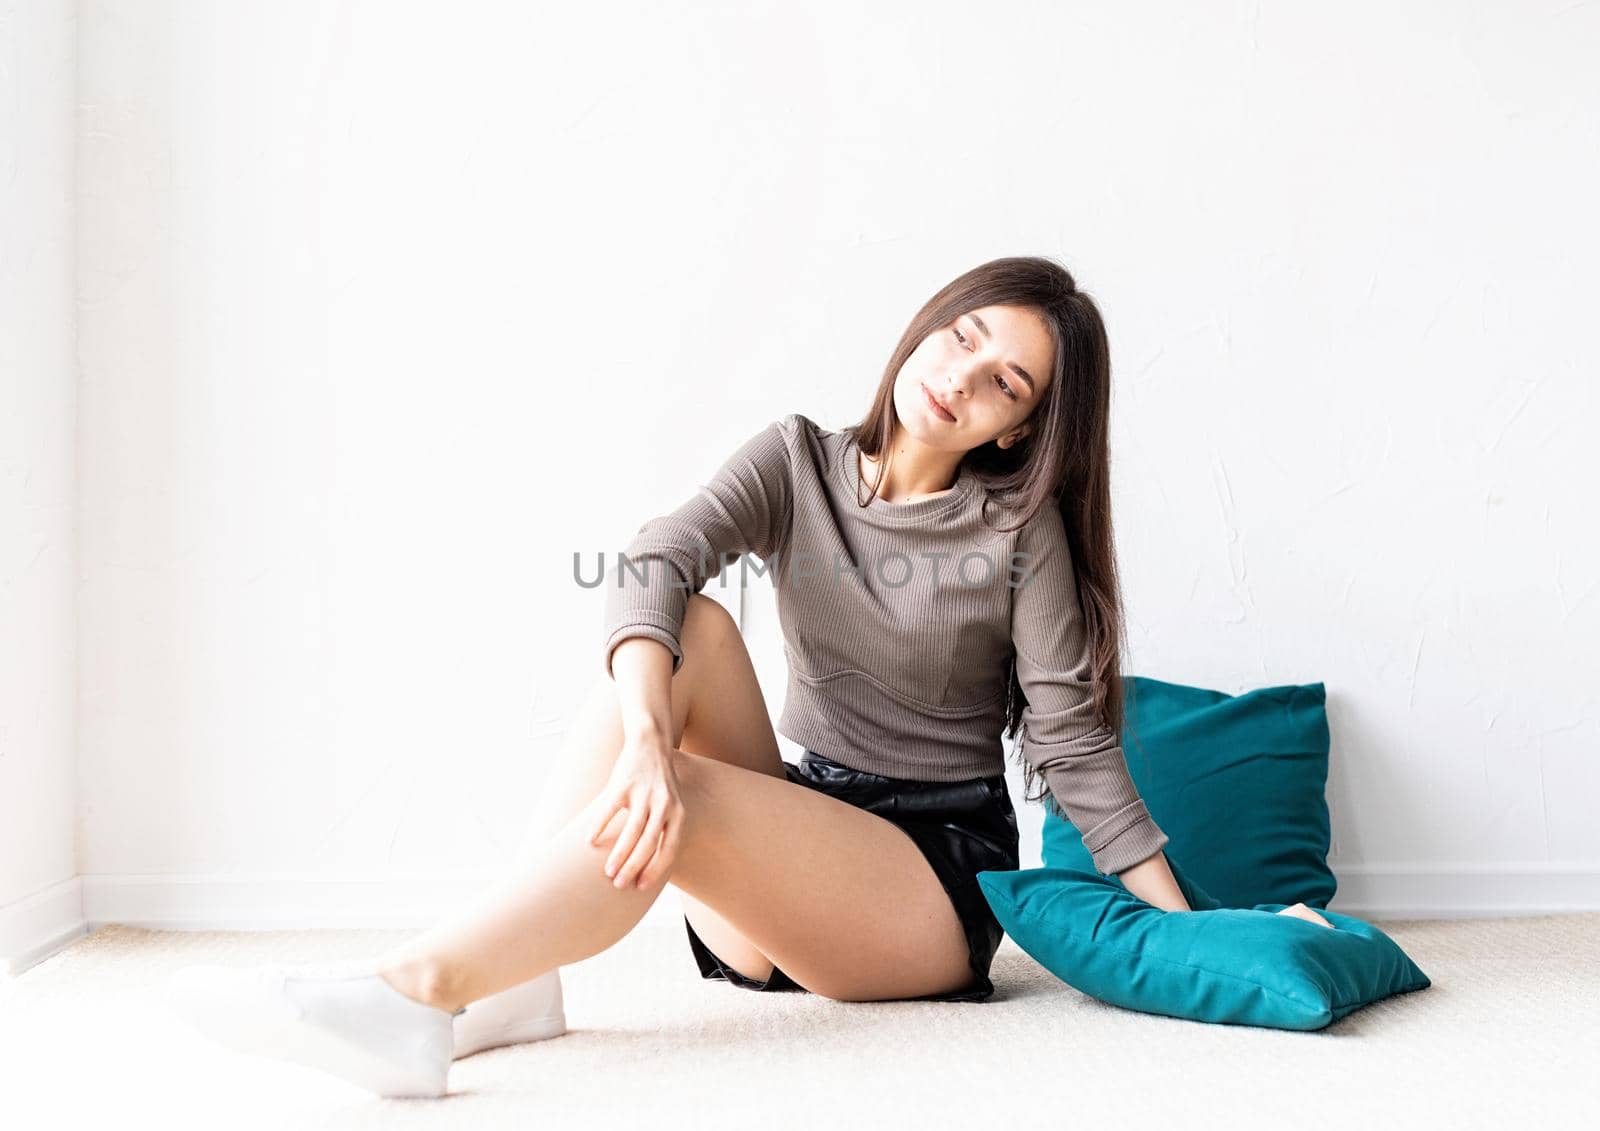 Beautiful young woman in casual clothes sitting on the floor with pillows smiling looking away